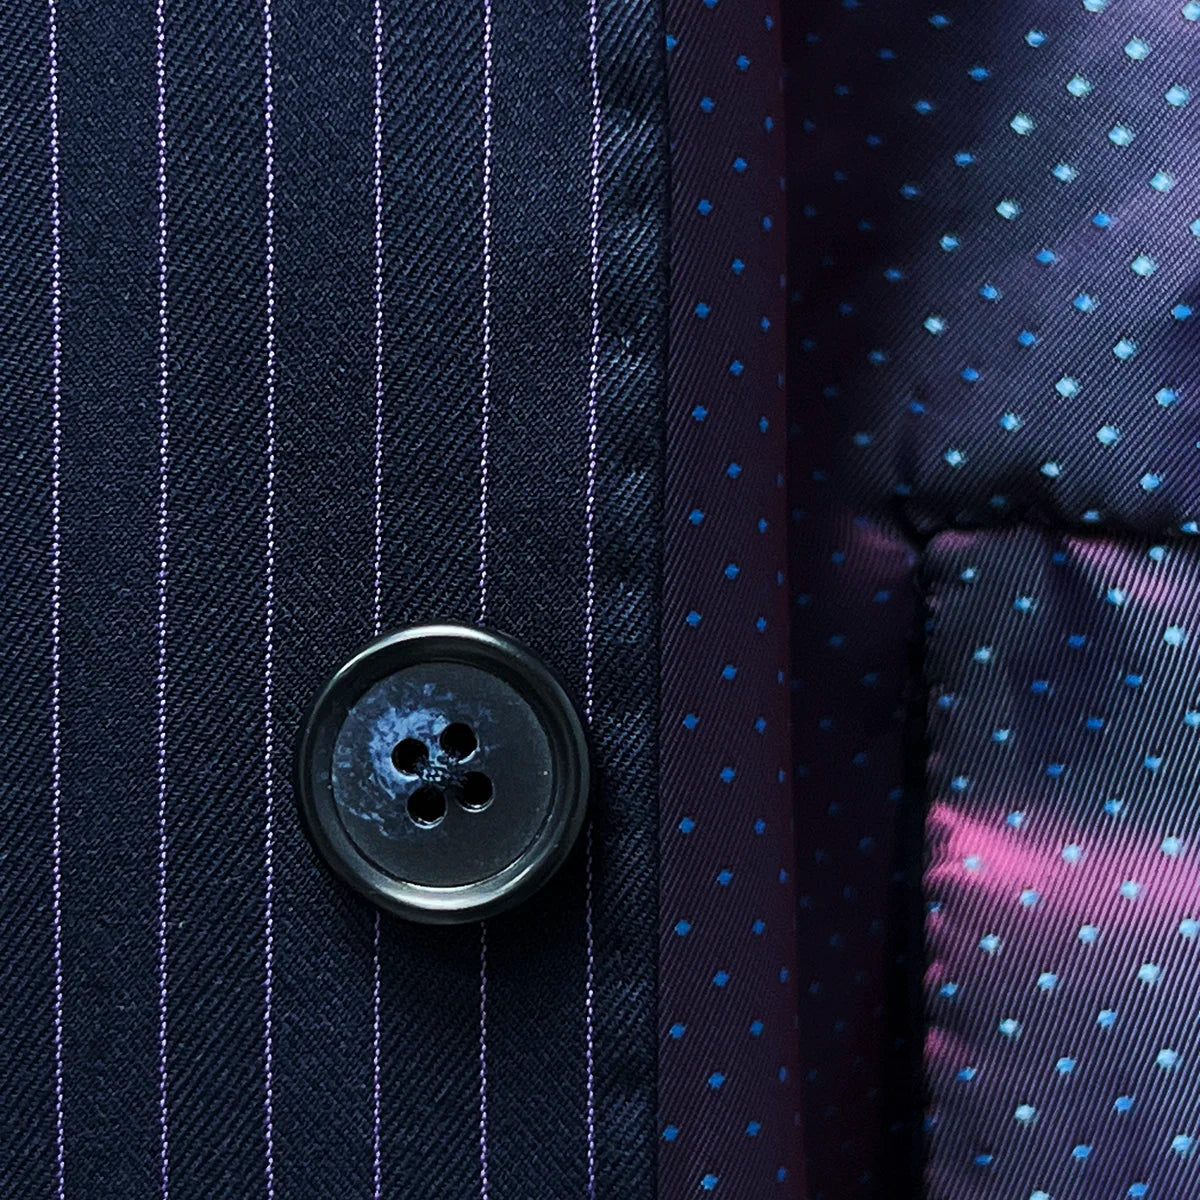 Horn marble buttons enhancing the refined look of a navy suit with purple pinstripes.